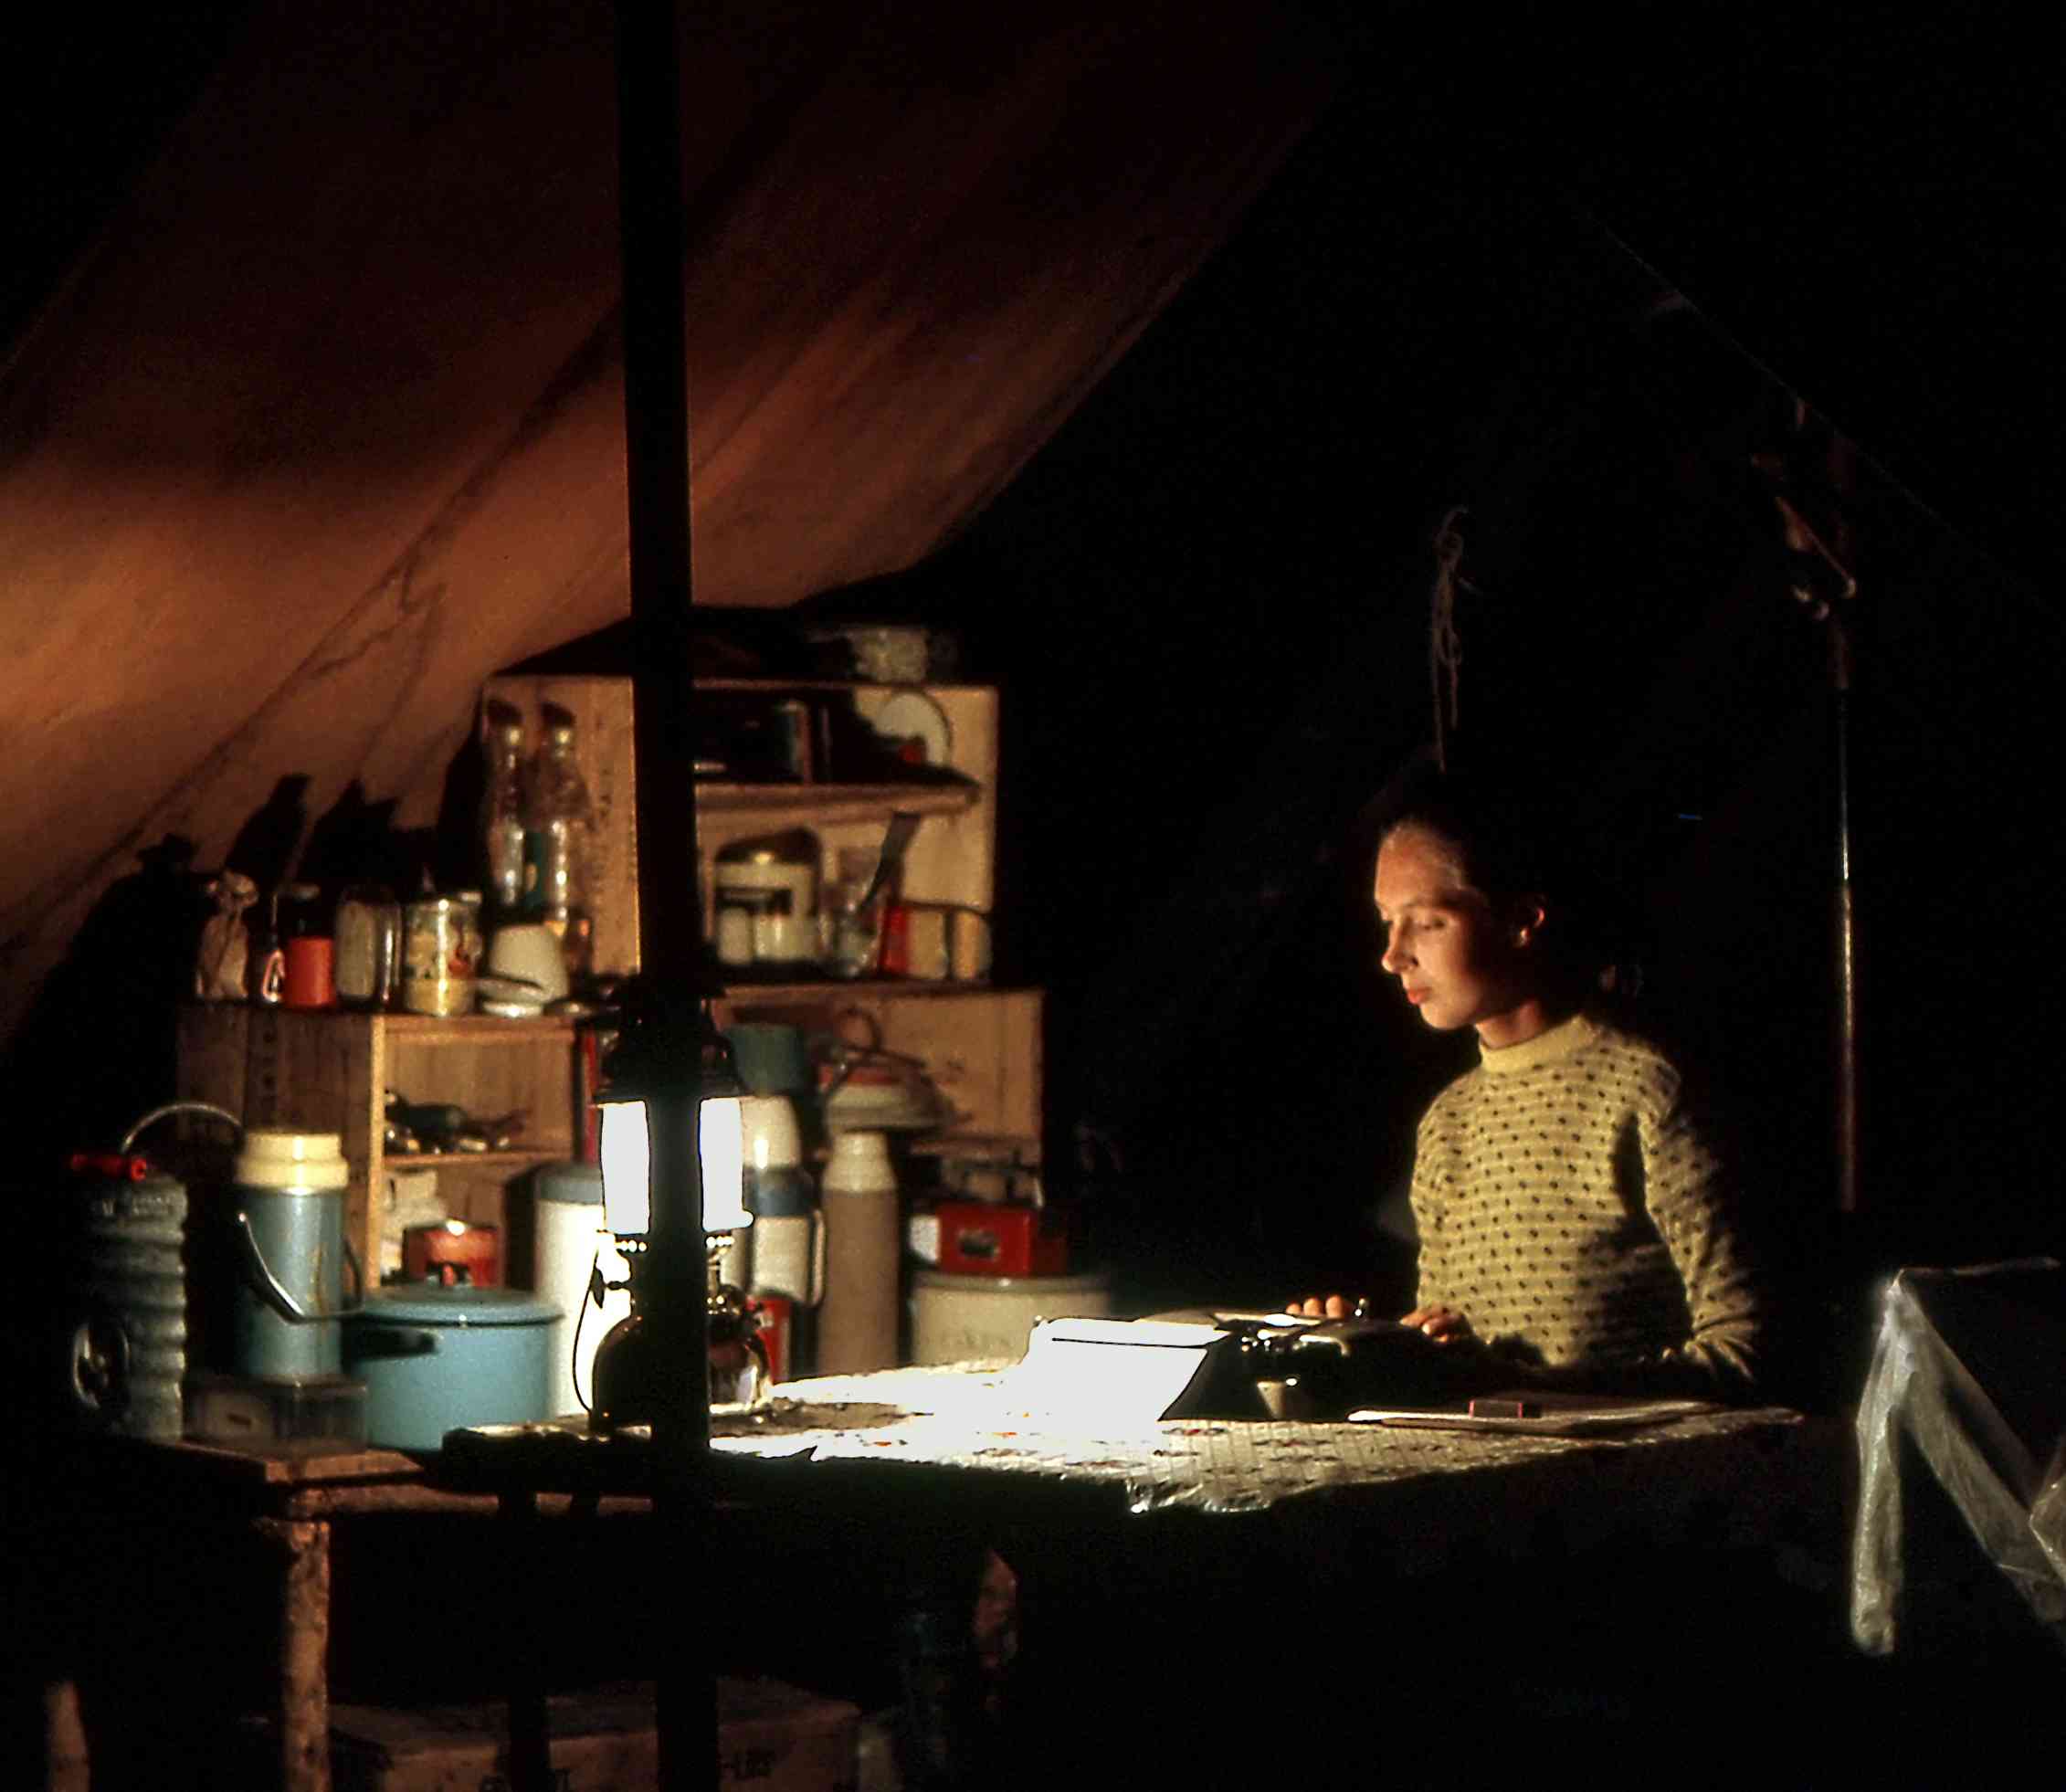 A young Jane Goodall writes notes on her desk in a tent by the dim light of a small lamp.